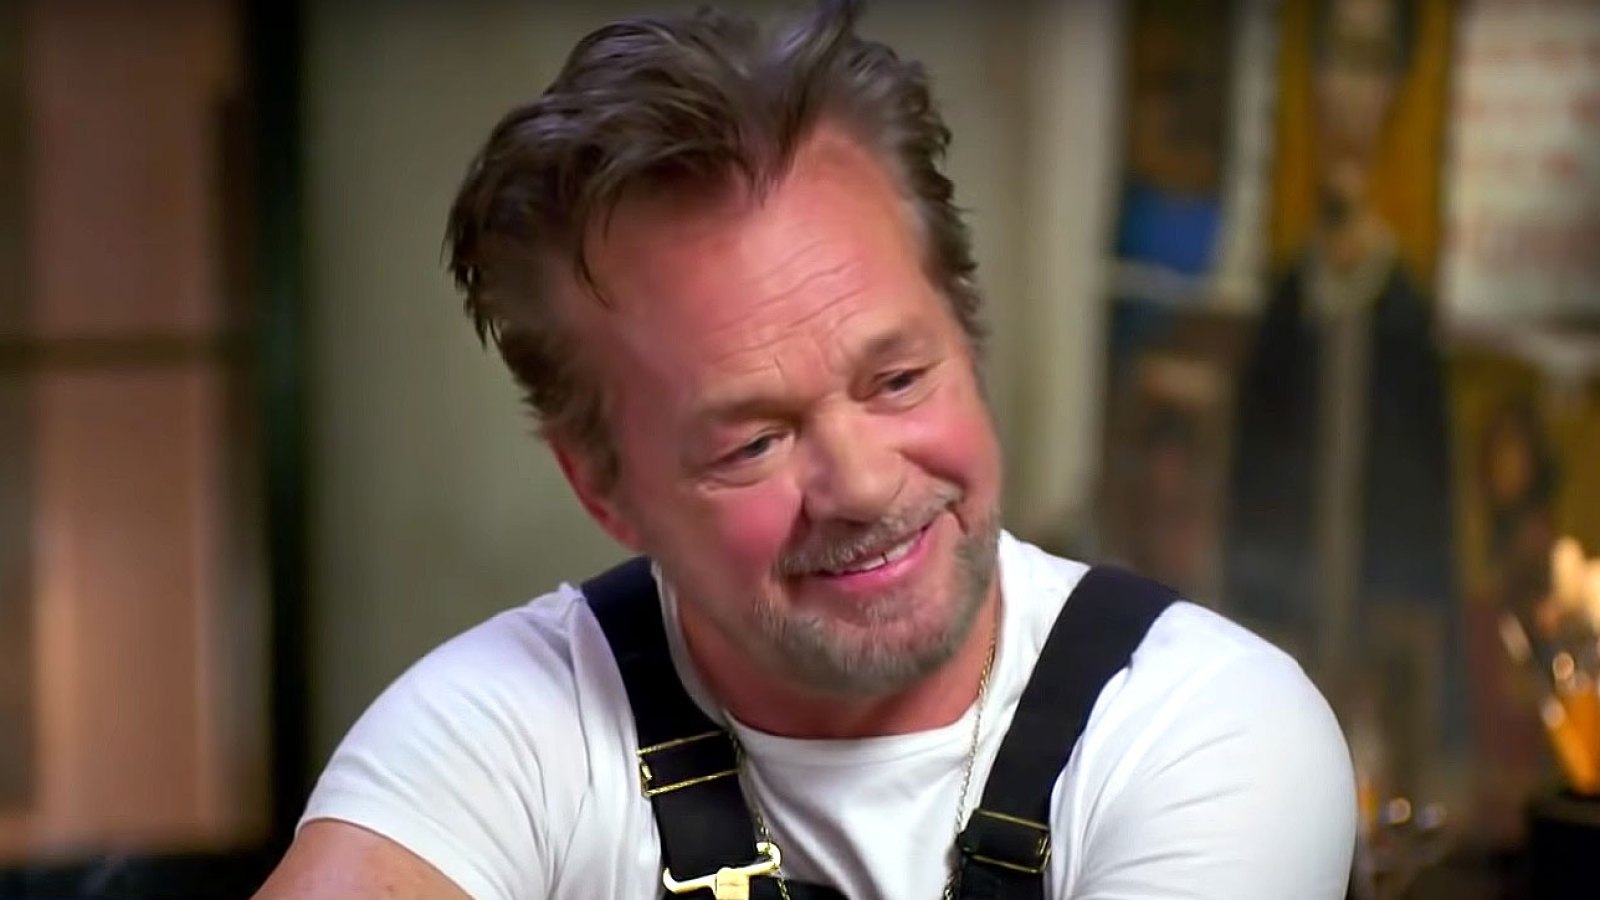 John Mellencamp Gushes Over Fiancée Meg Ryan: I'm Engaged to 'the Funniest Woman I Ever Met'